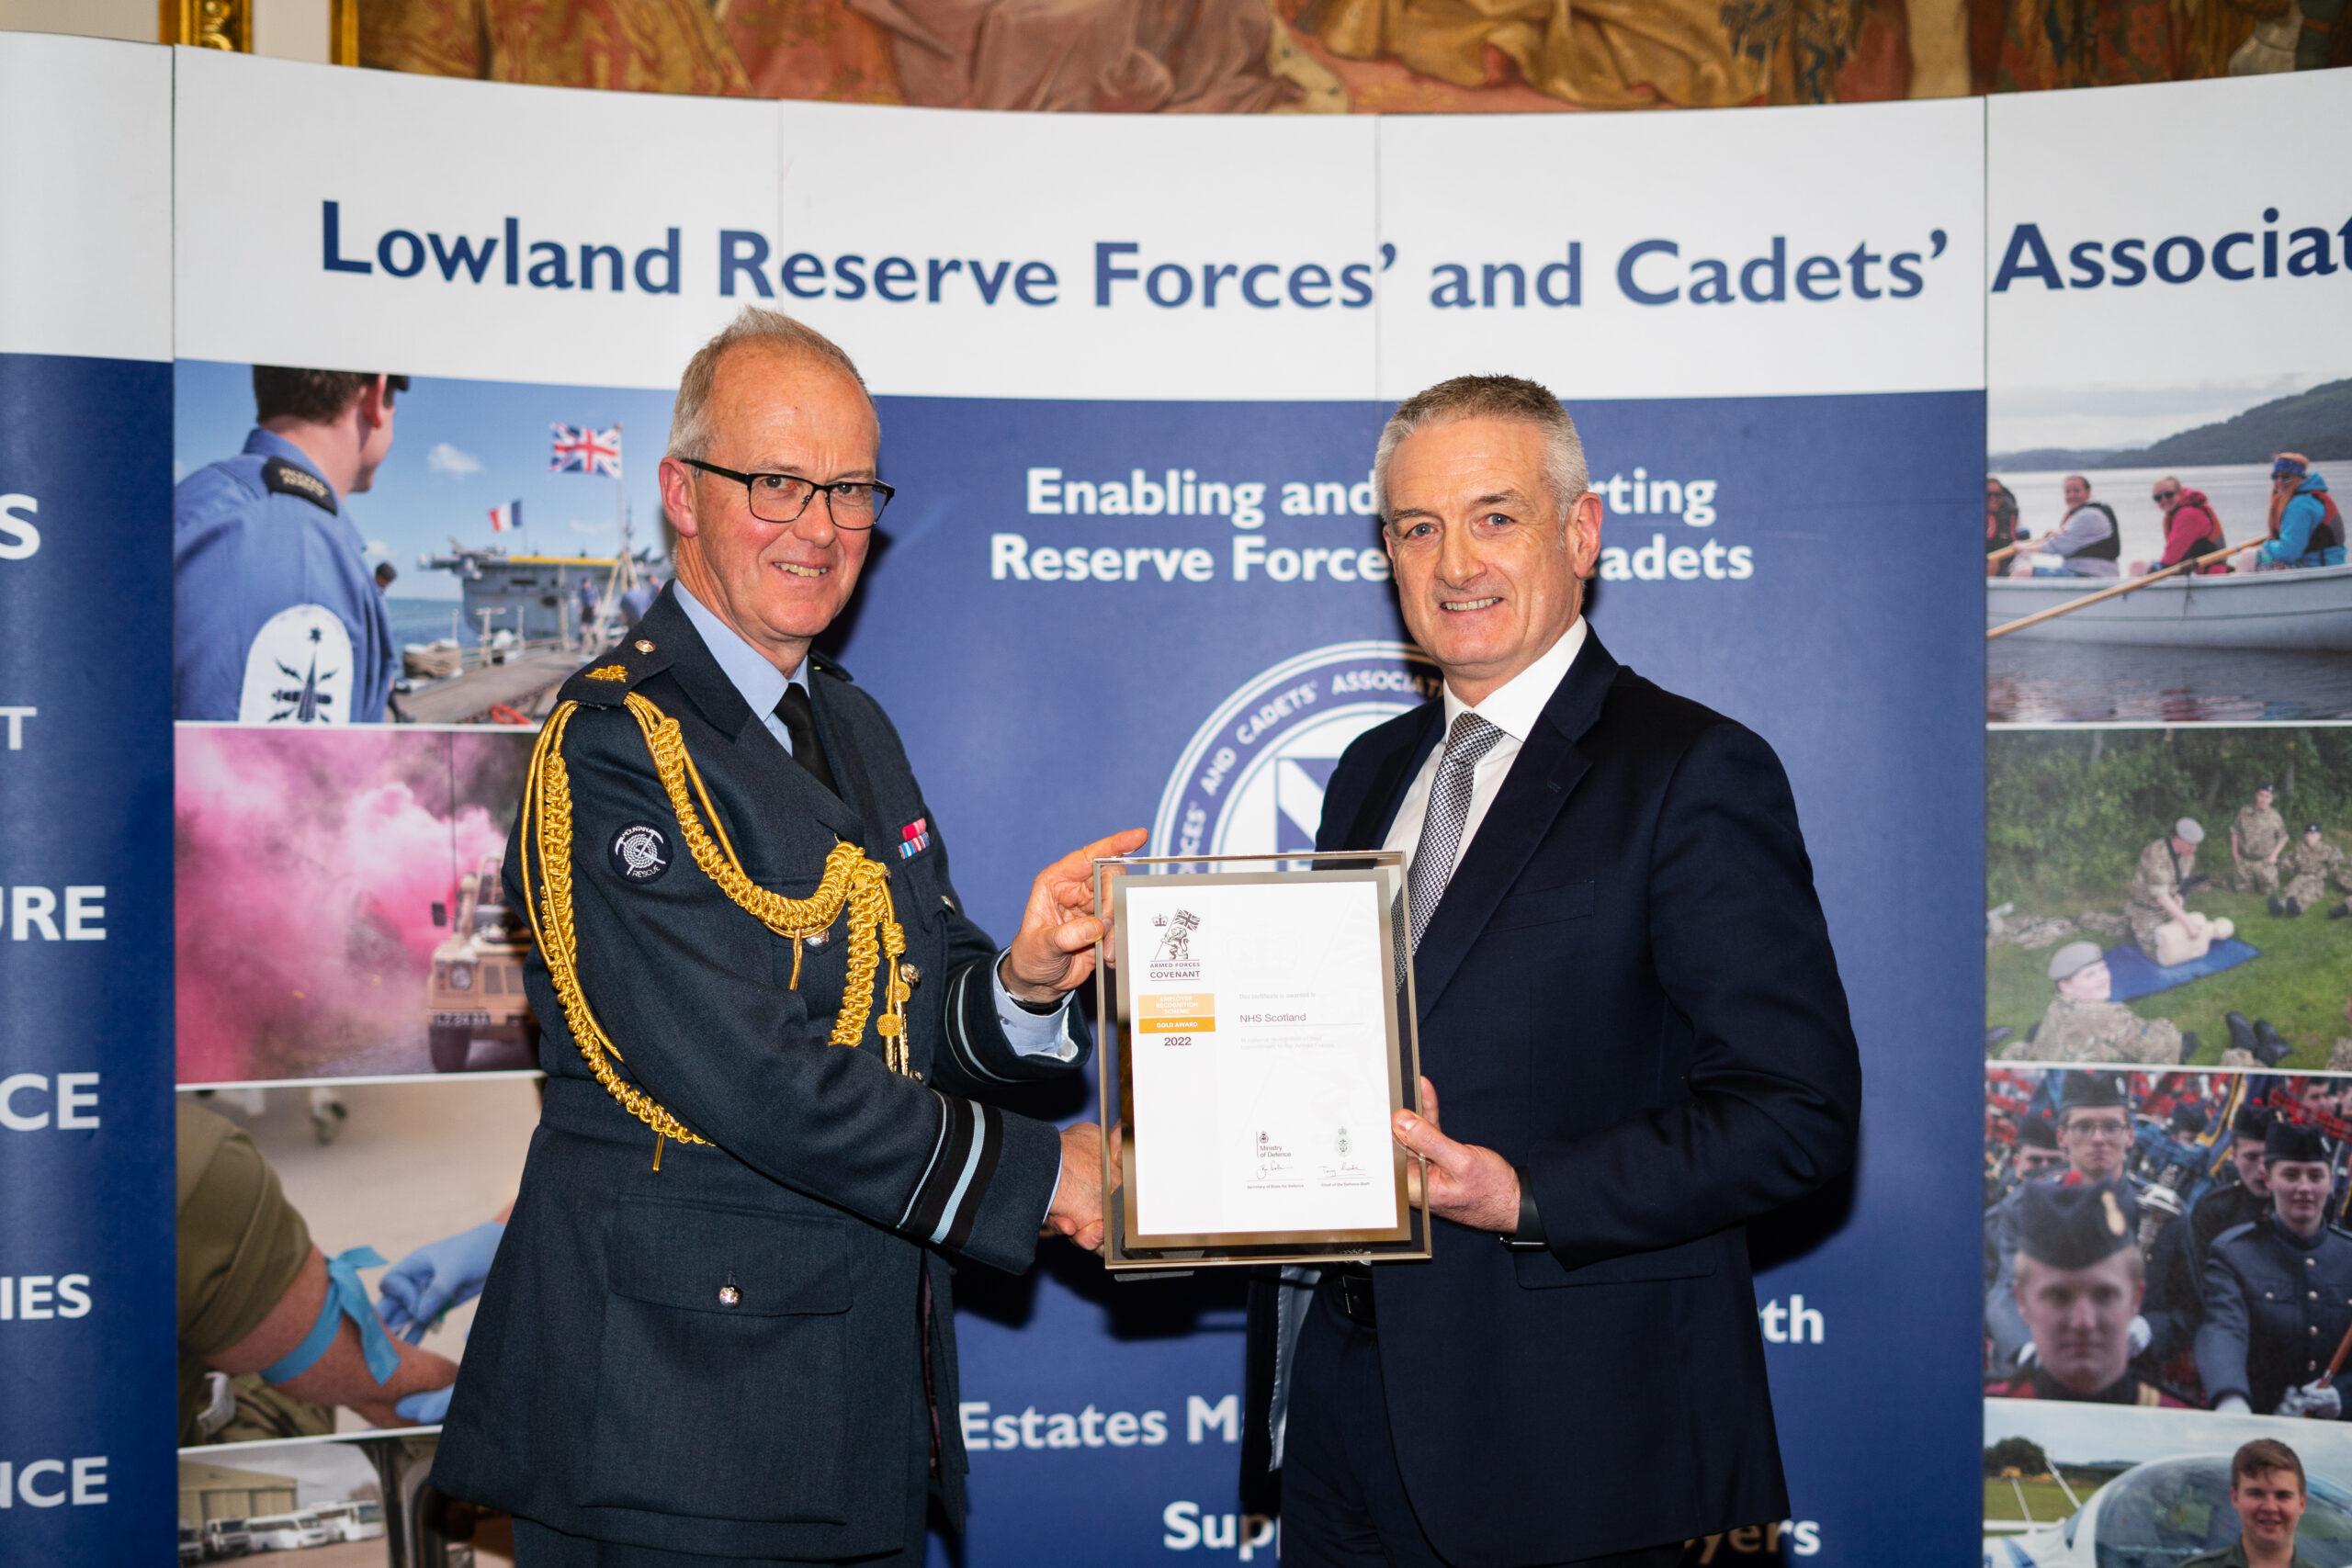 HNS Scotland's John Burns receiving the Gold ERS Revalidation from Air Officer Scotland